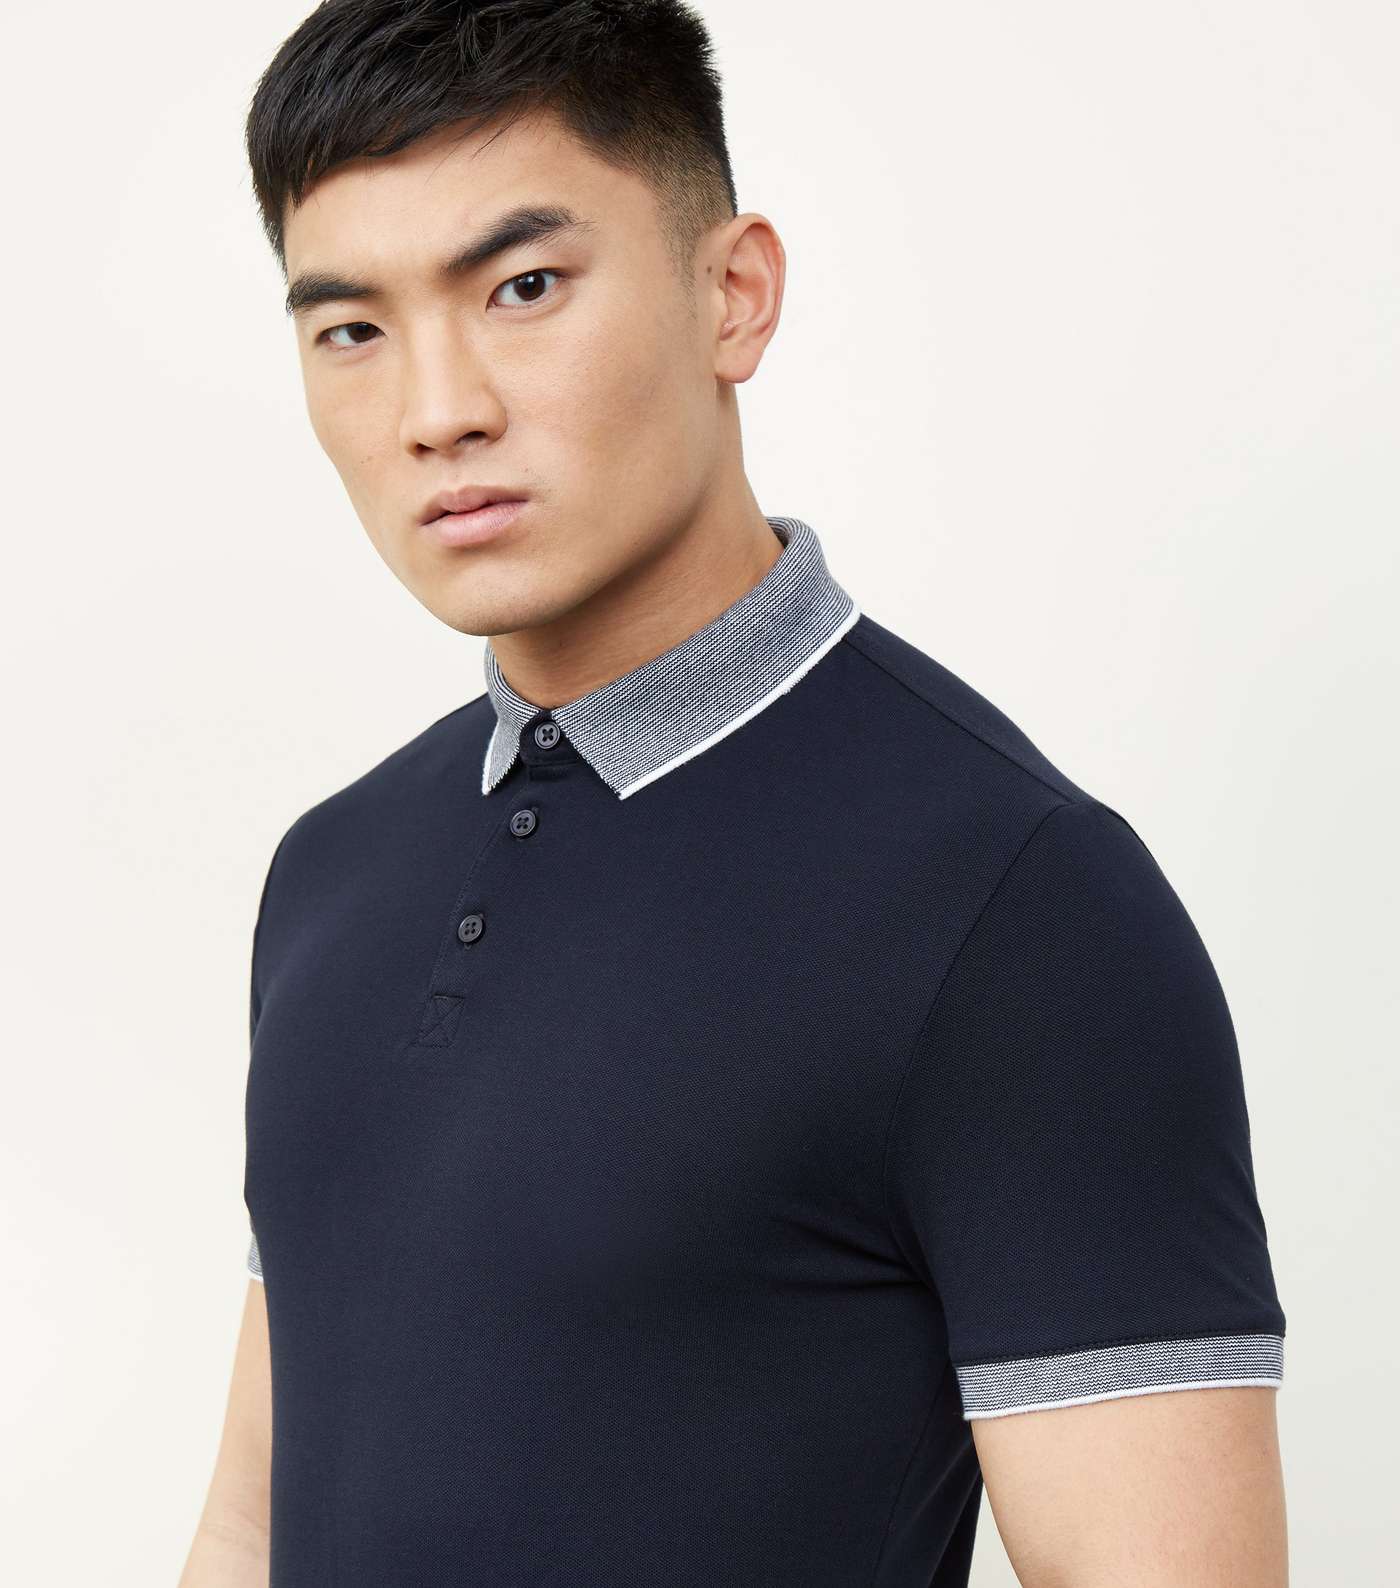 Navy Stripe Collar Muscle Fit Polo Shirt Image 5